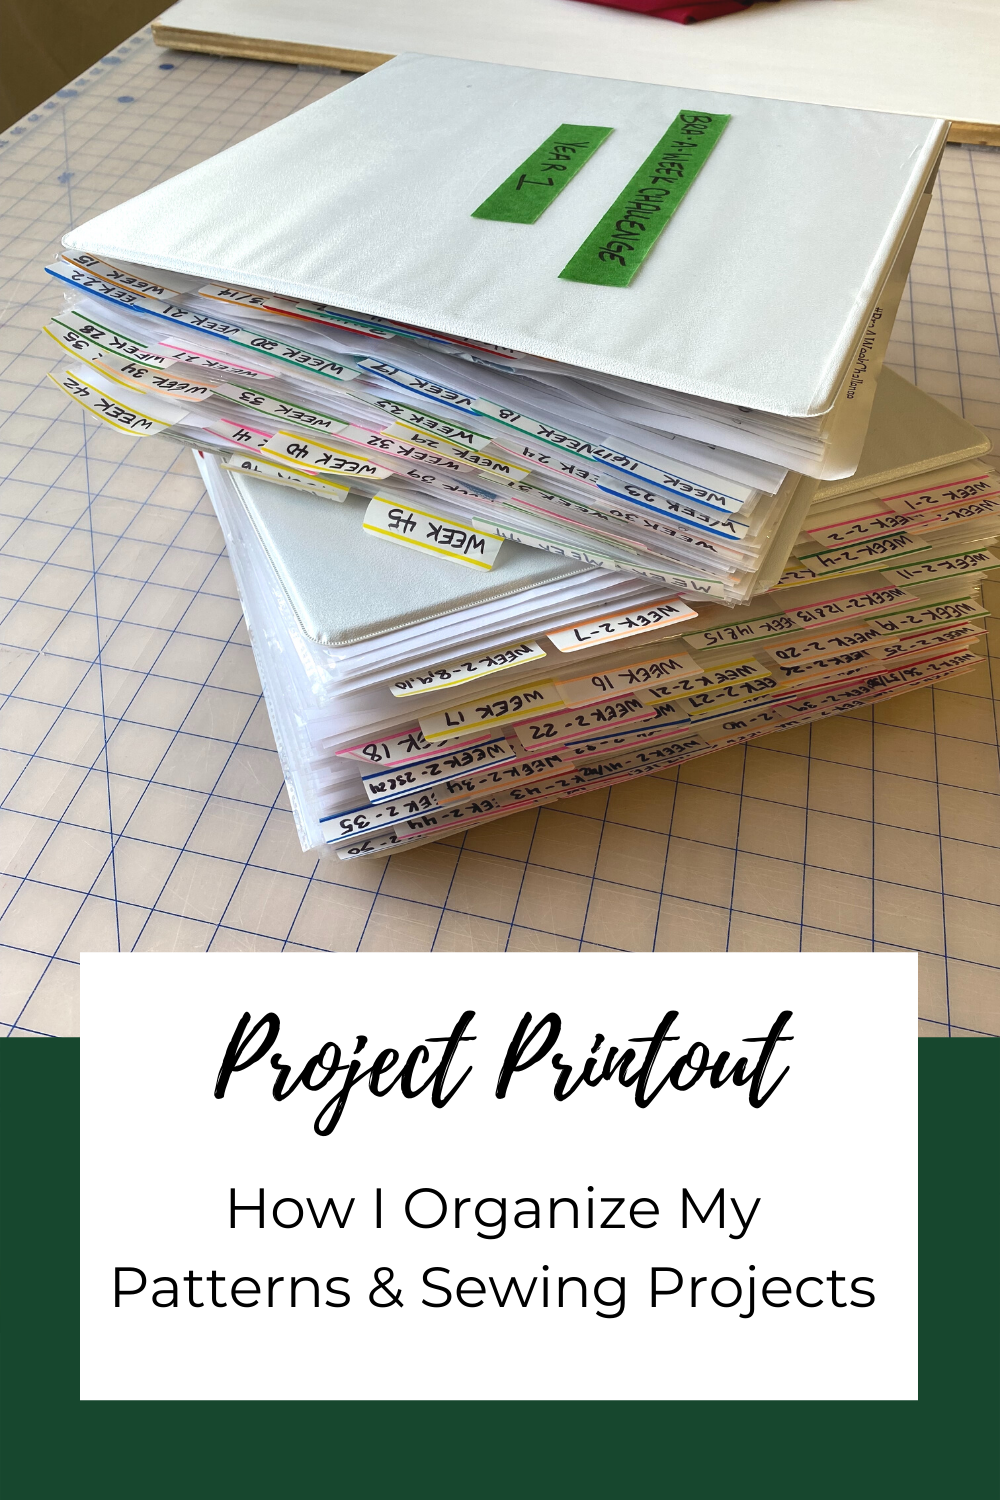 Project Printout: How I Organize My Patterns & Sewing Projects